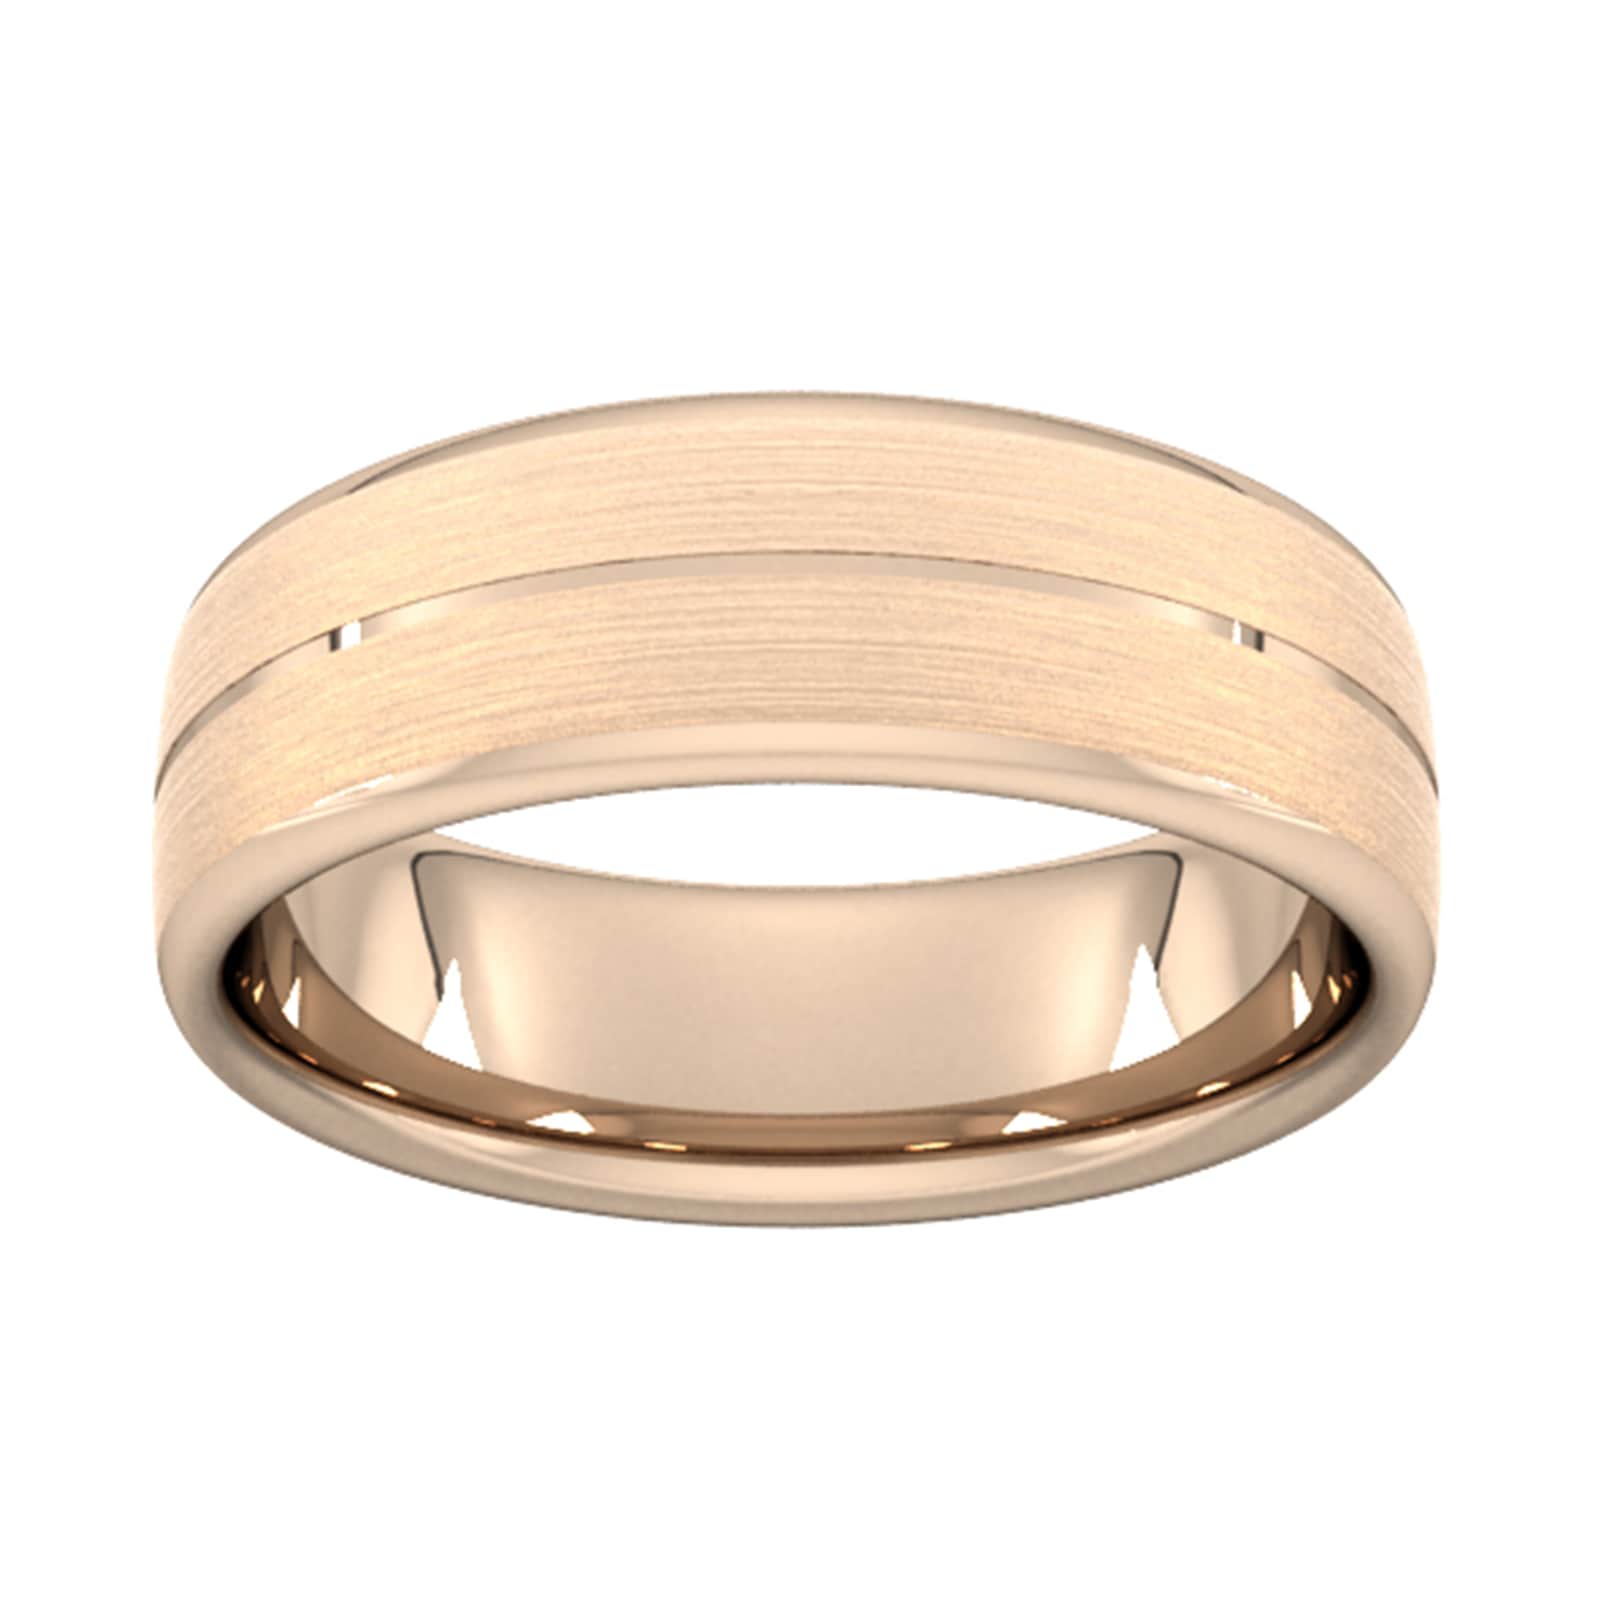 7mm Traditional Court Standard Centre Groove With Chamfered Edge Wedding Ring In 18 Carat Rose Gold - Ring Size X